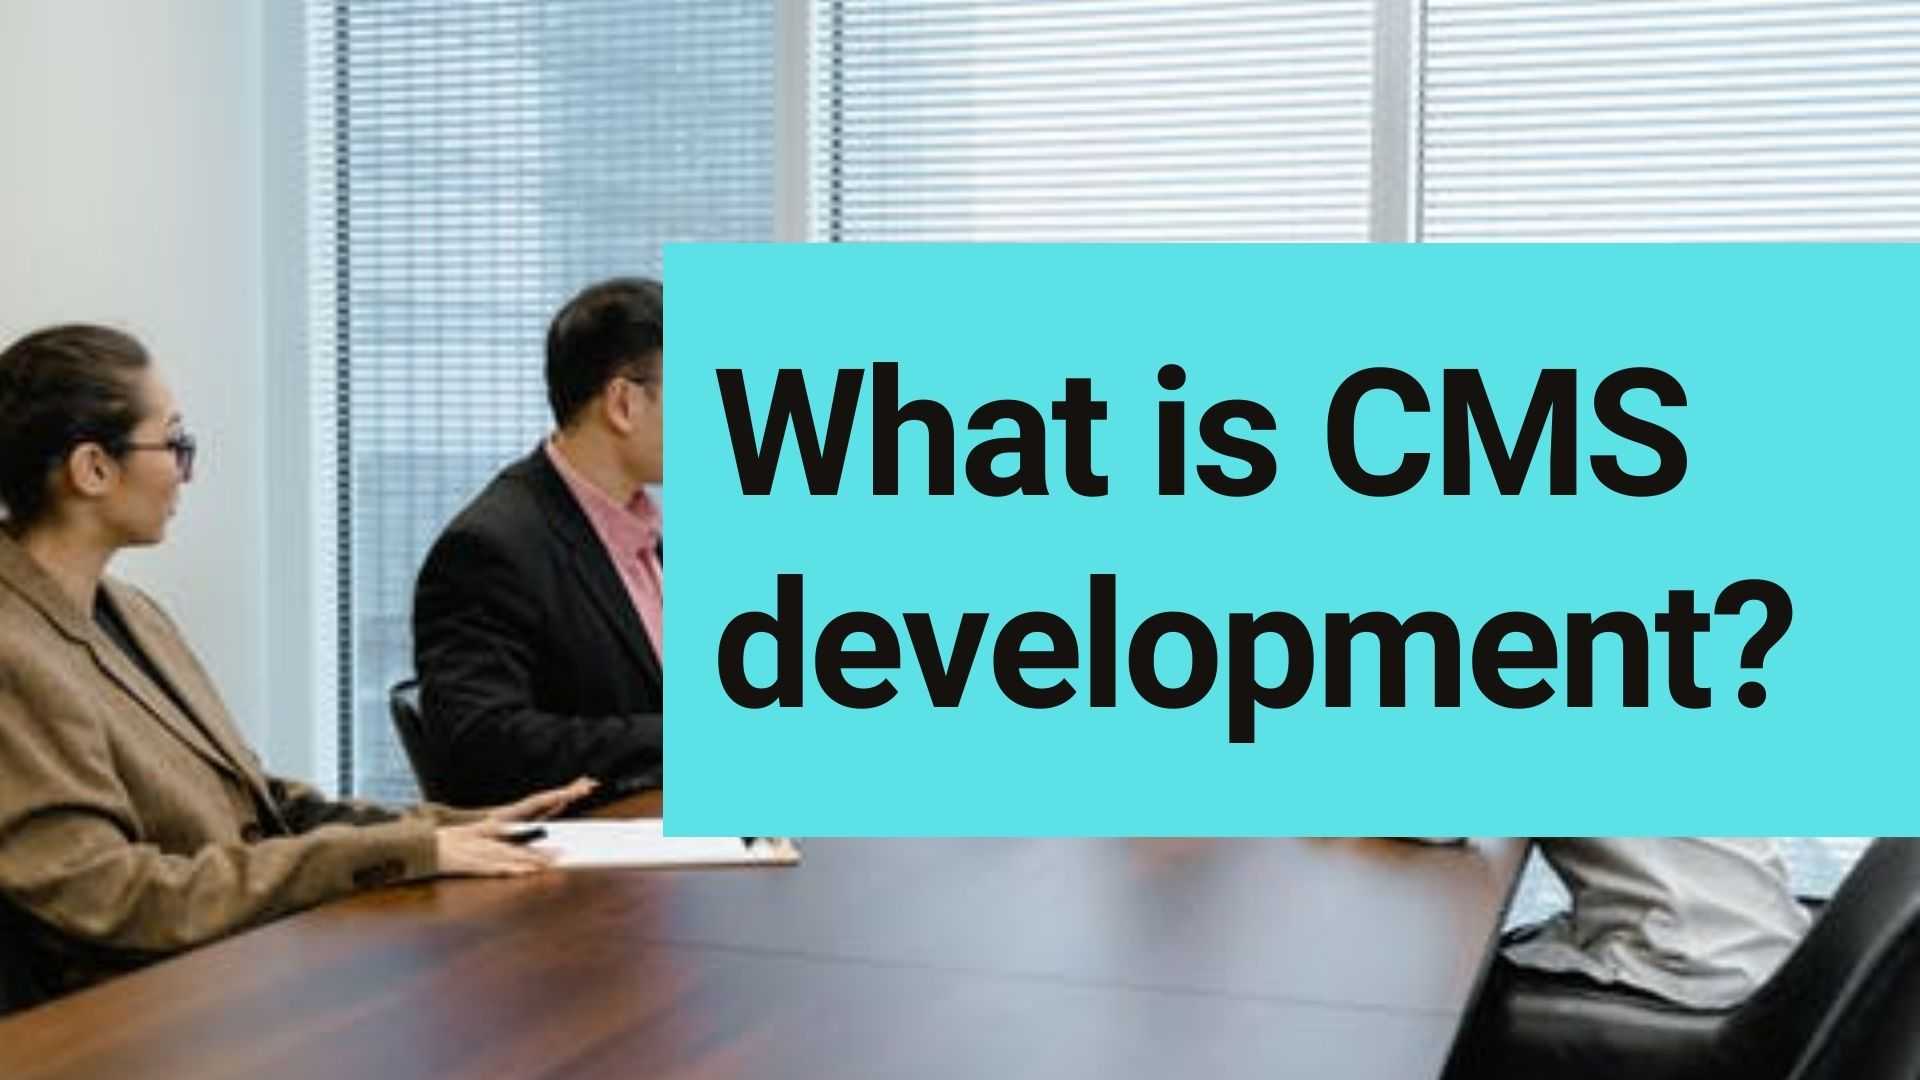 What is CMS development?